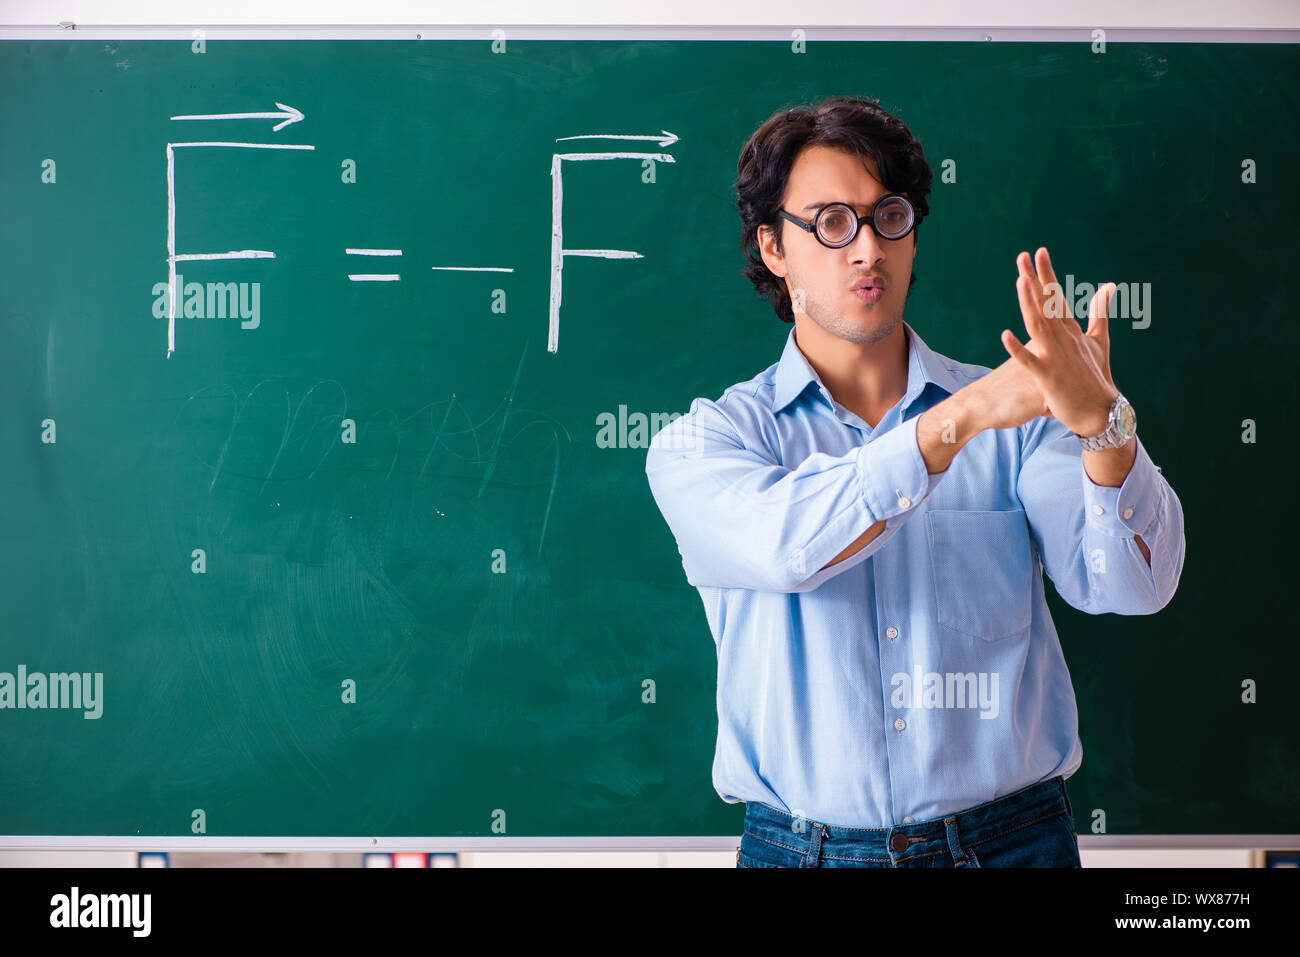 Young male physic standing in front of the green board Stock Photo